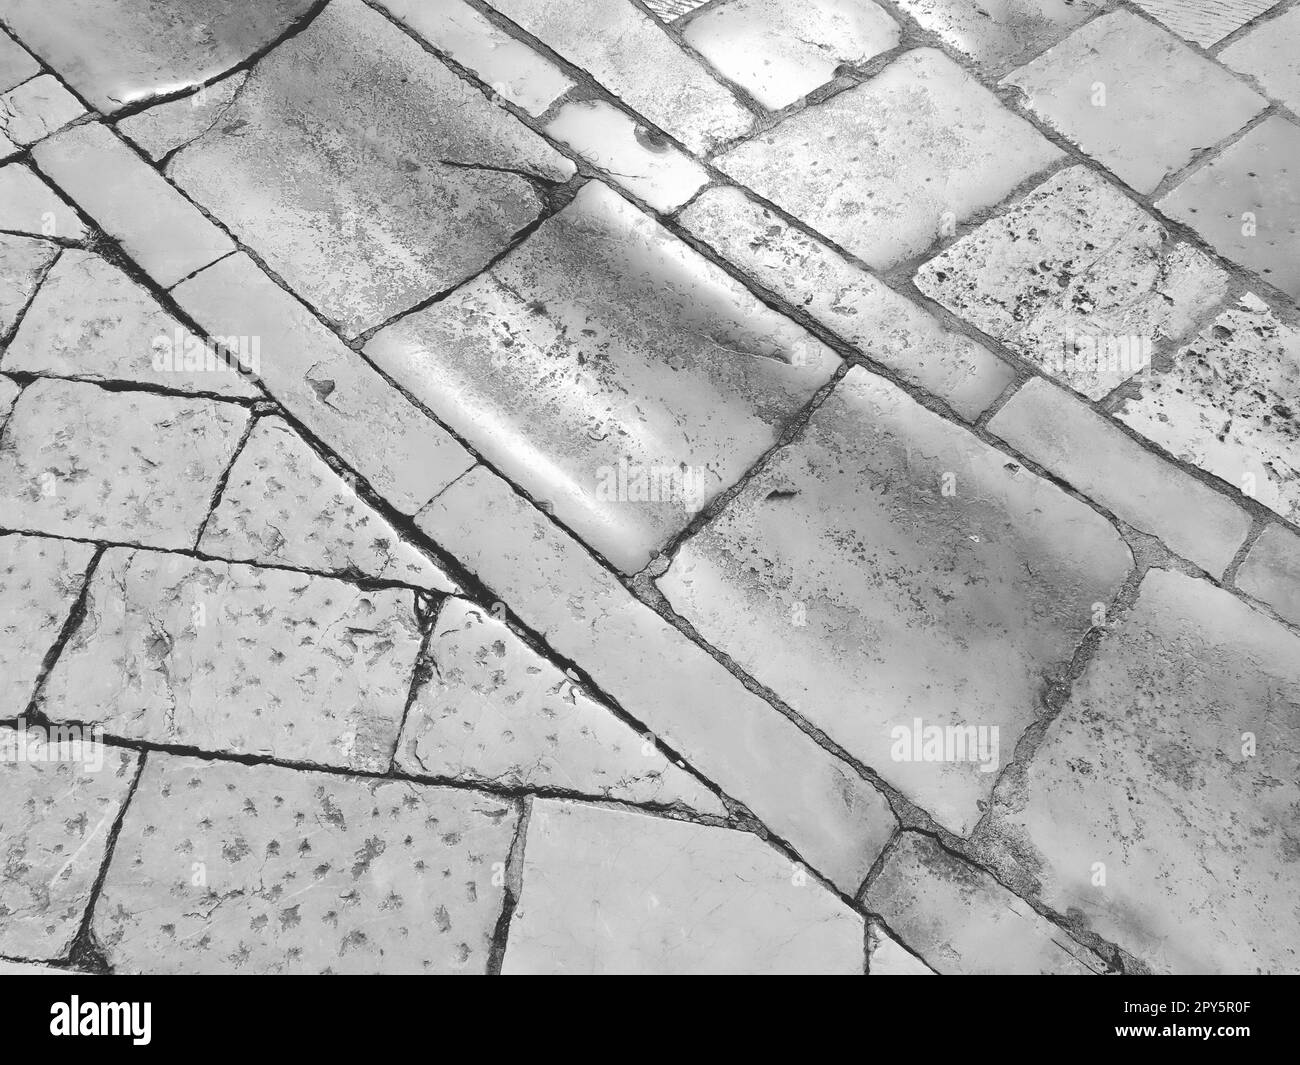 Marble floor on the street, Dubrovnik, Croatia. Antique masonry tiles rectangular blocks. Metamorphic rock composed of calcite CaCO3. Drainage, charcoal for water. Black and white monochrome Stock Photo